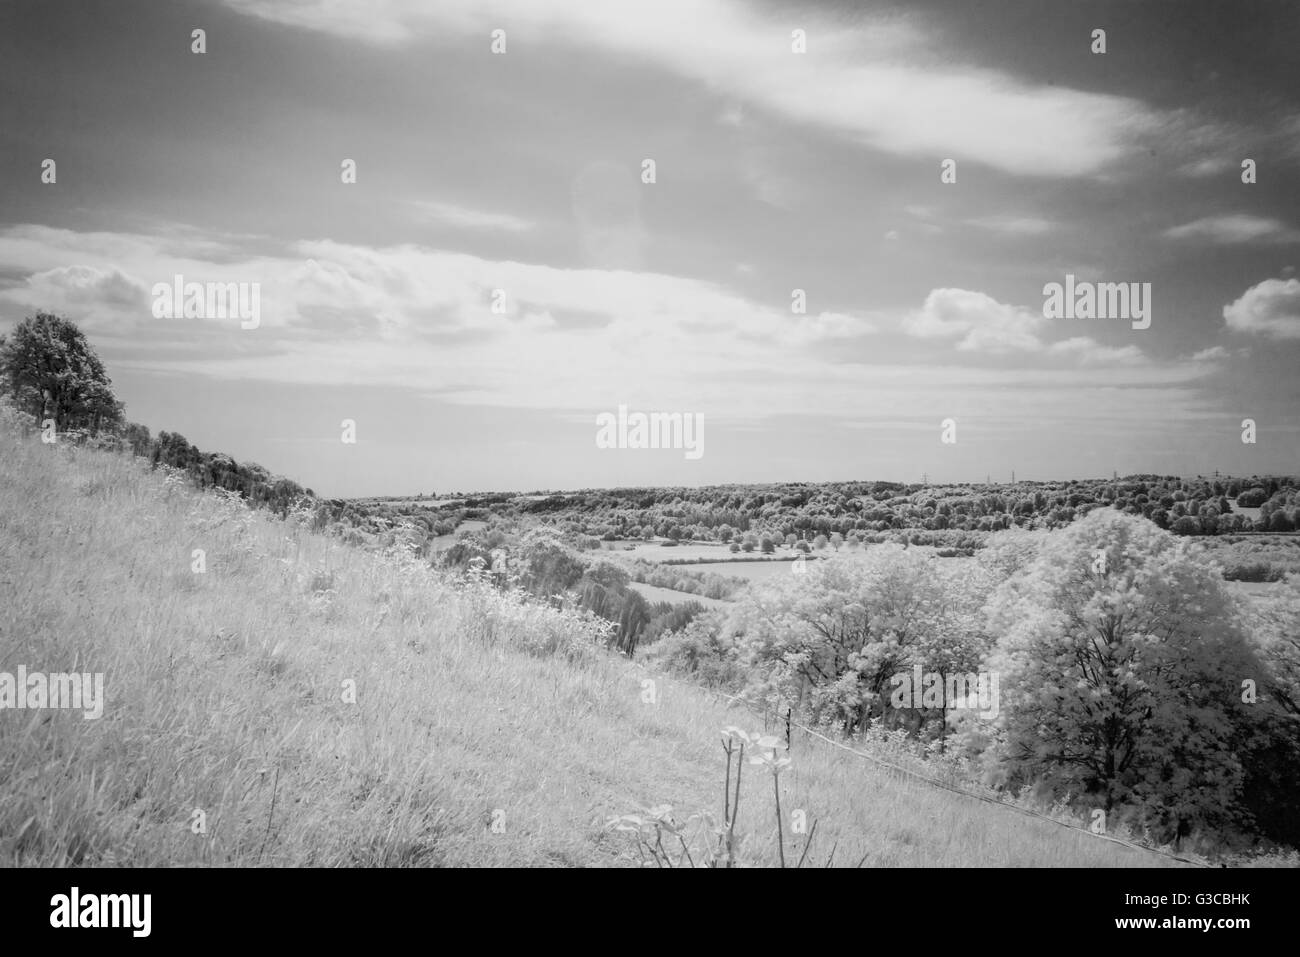 View of the Thames Valley at Hartslock, Oxfordshire, UK. Using a R72 infra-red filter to eliminate most of the visible spectrum. Stock Photo